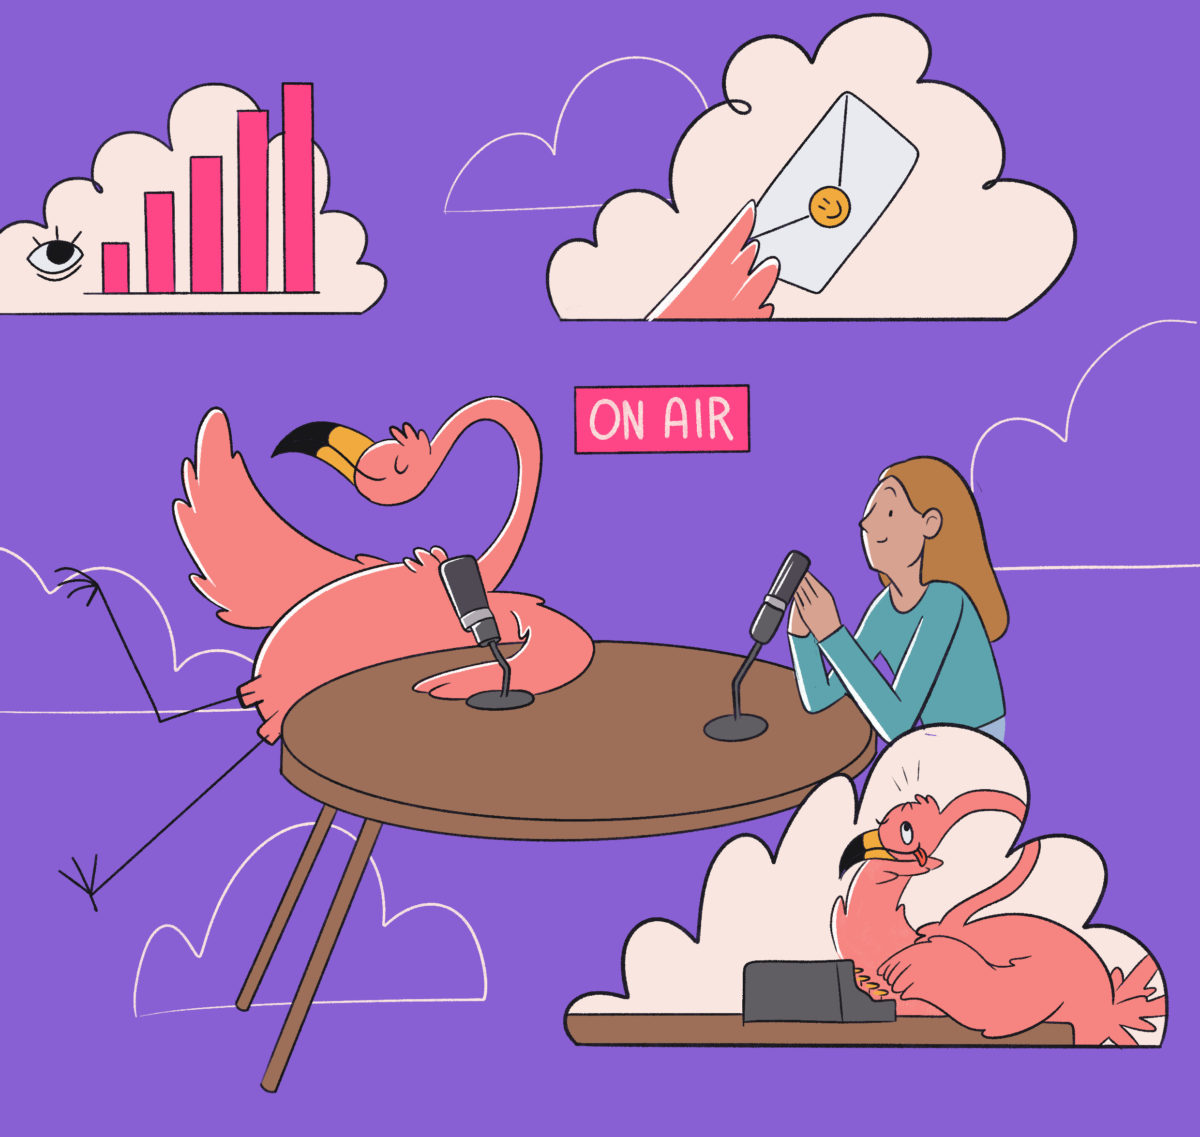 A cartoon of a woman recording a podcast with a flamingo resting on the table, while various whimsical elements, such as floating charts and a hand holding a phone, surround them.